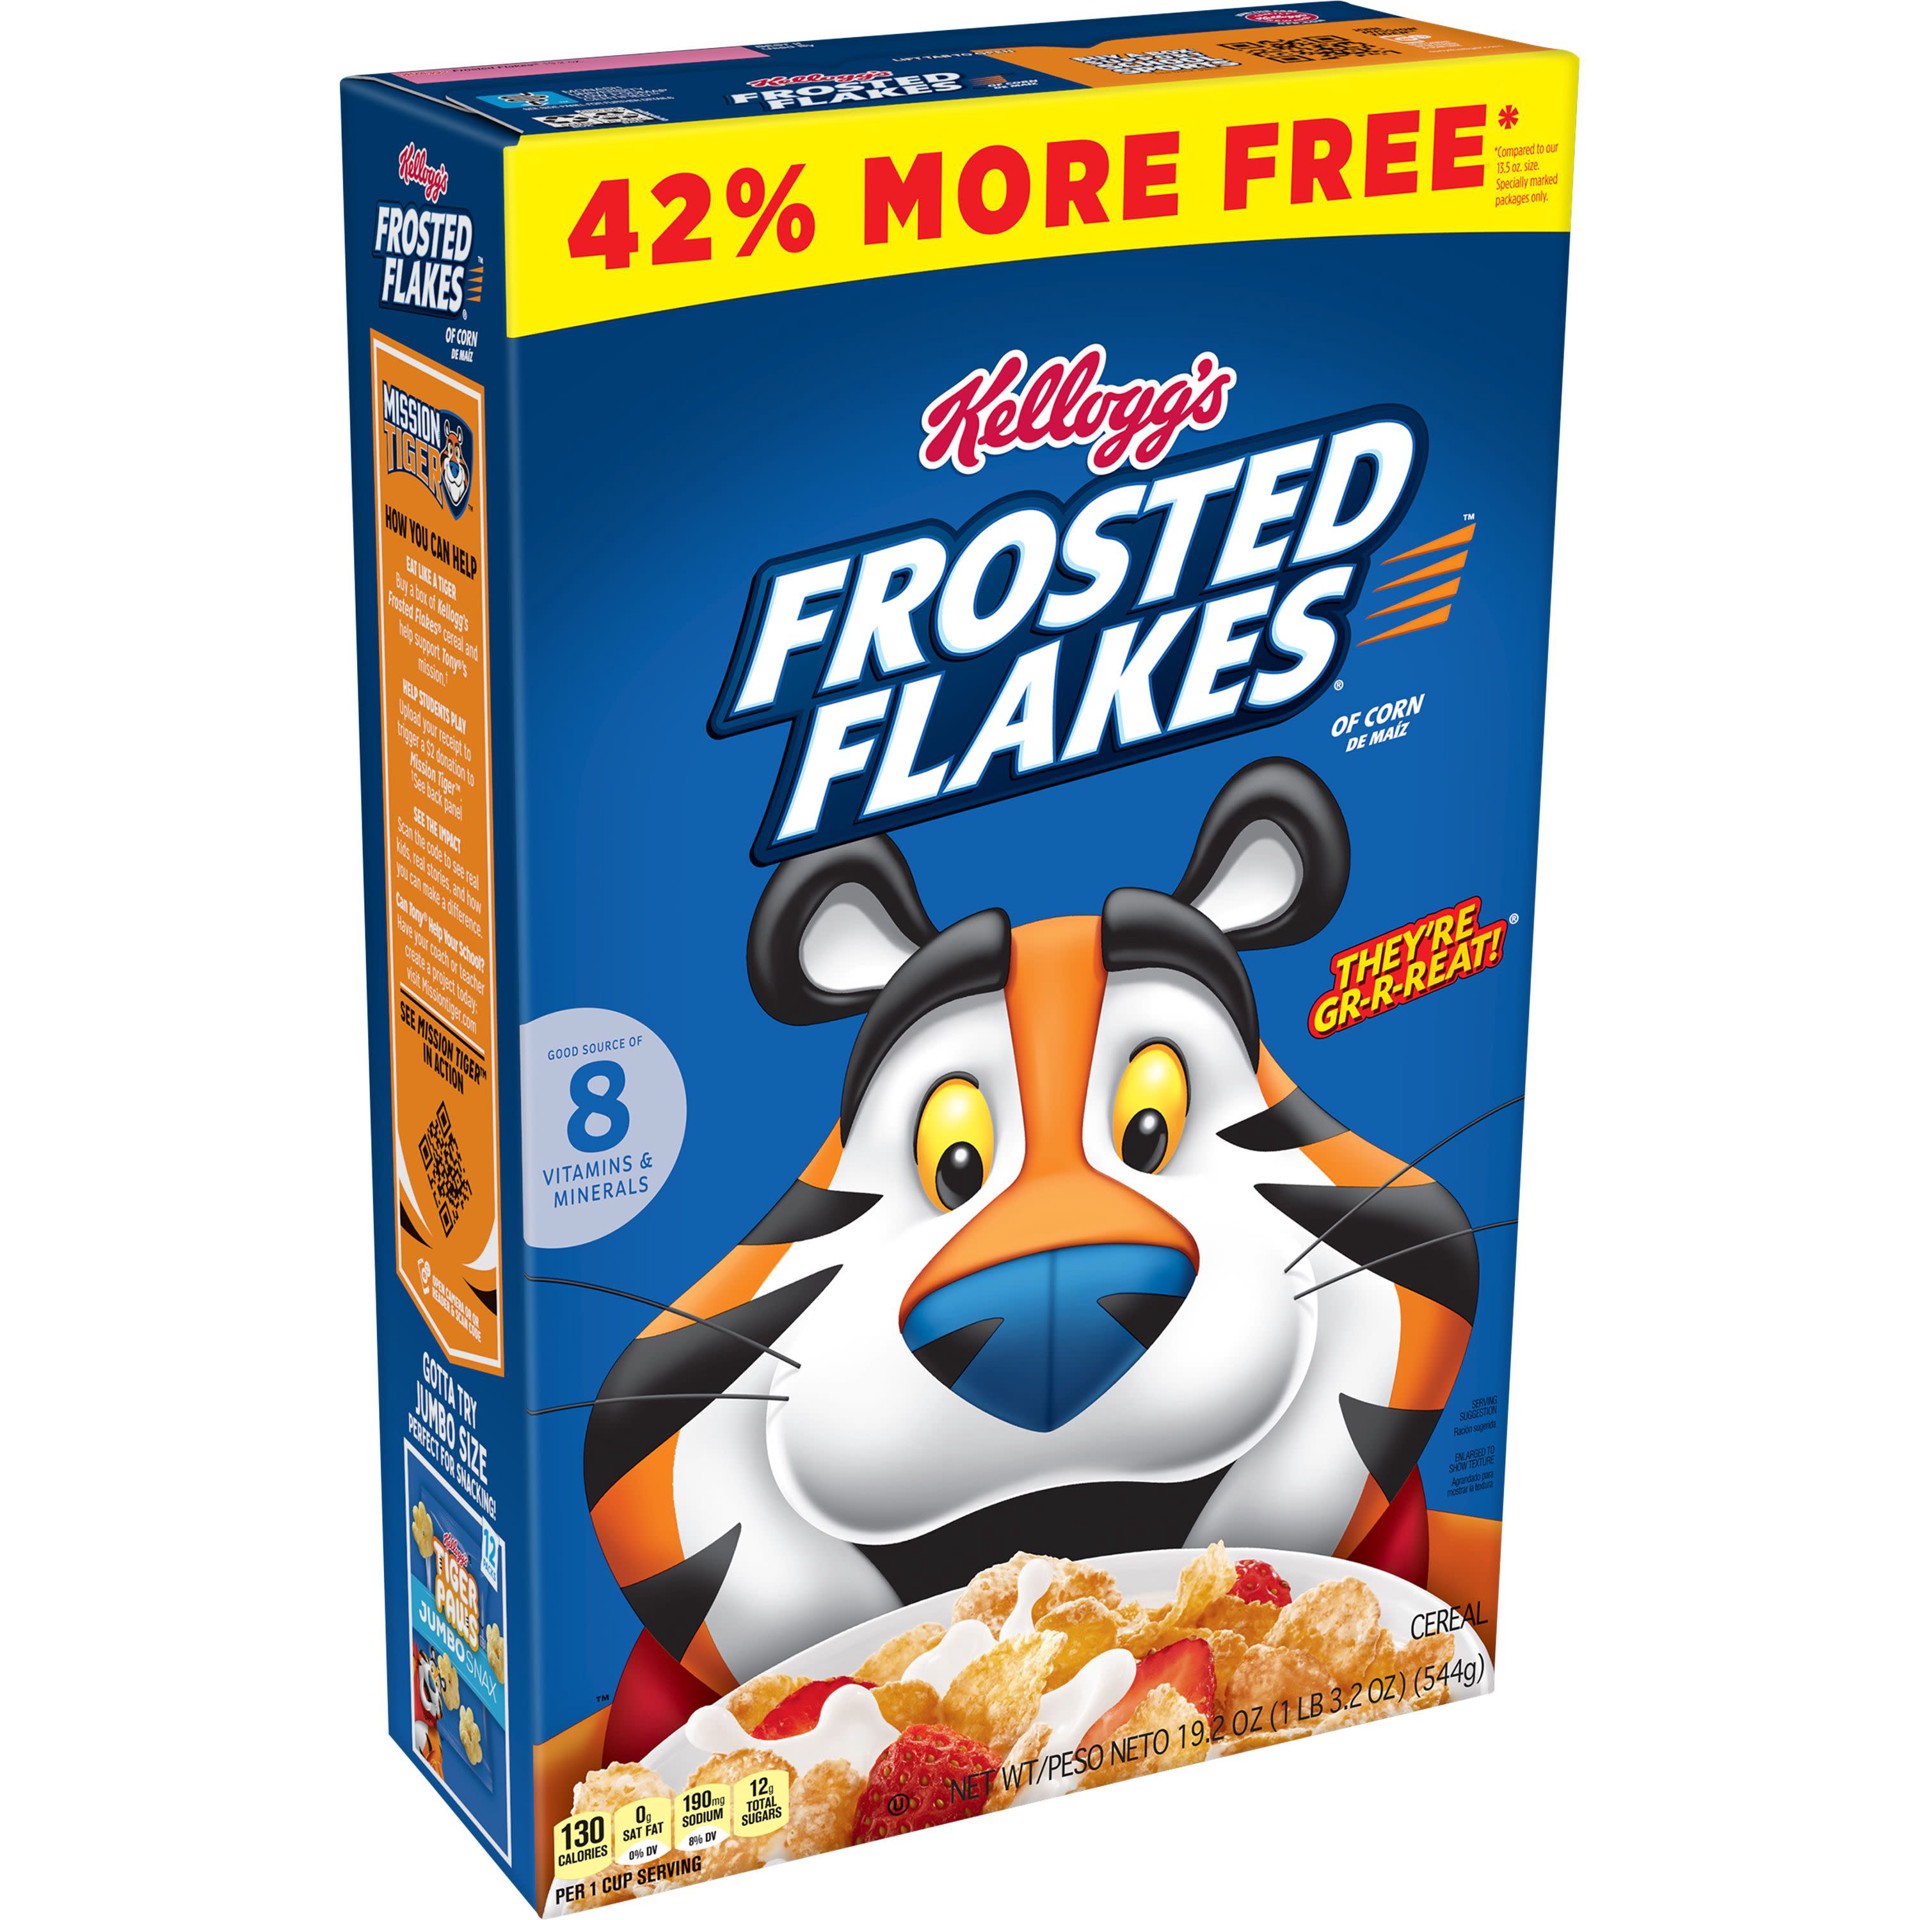 slide 1 of 8, Frosted Flakes Kellogg's Frosted Flakes Breakfast Cereal, 8 Vitamins and Minerals, Kids Snacks, Original, 19.2oz Box, 1 Box, 19.2 oz